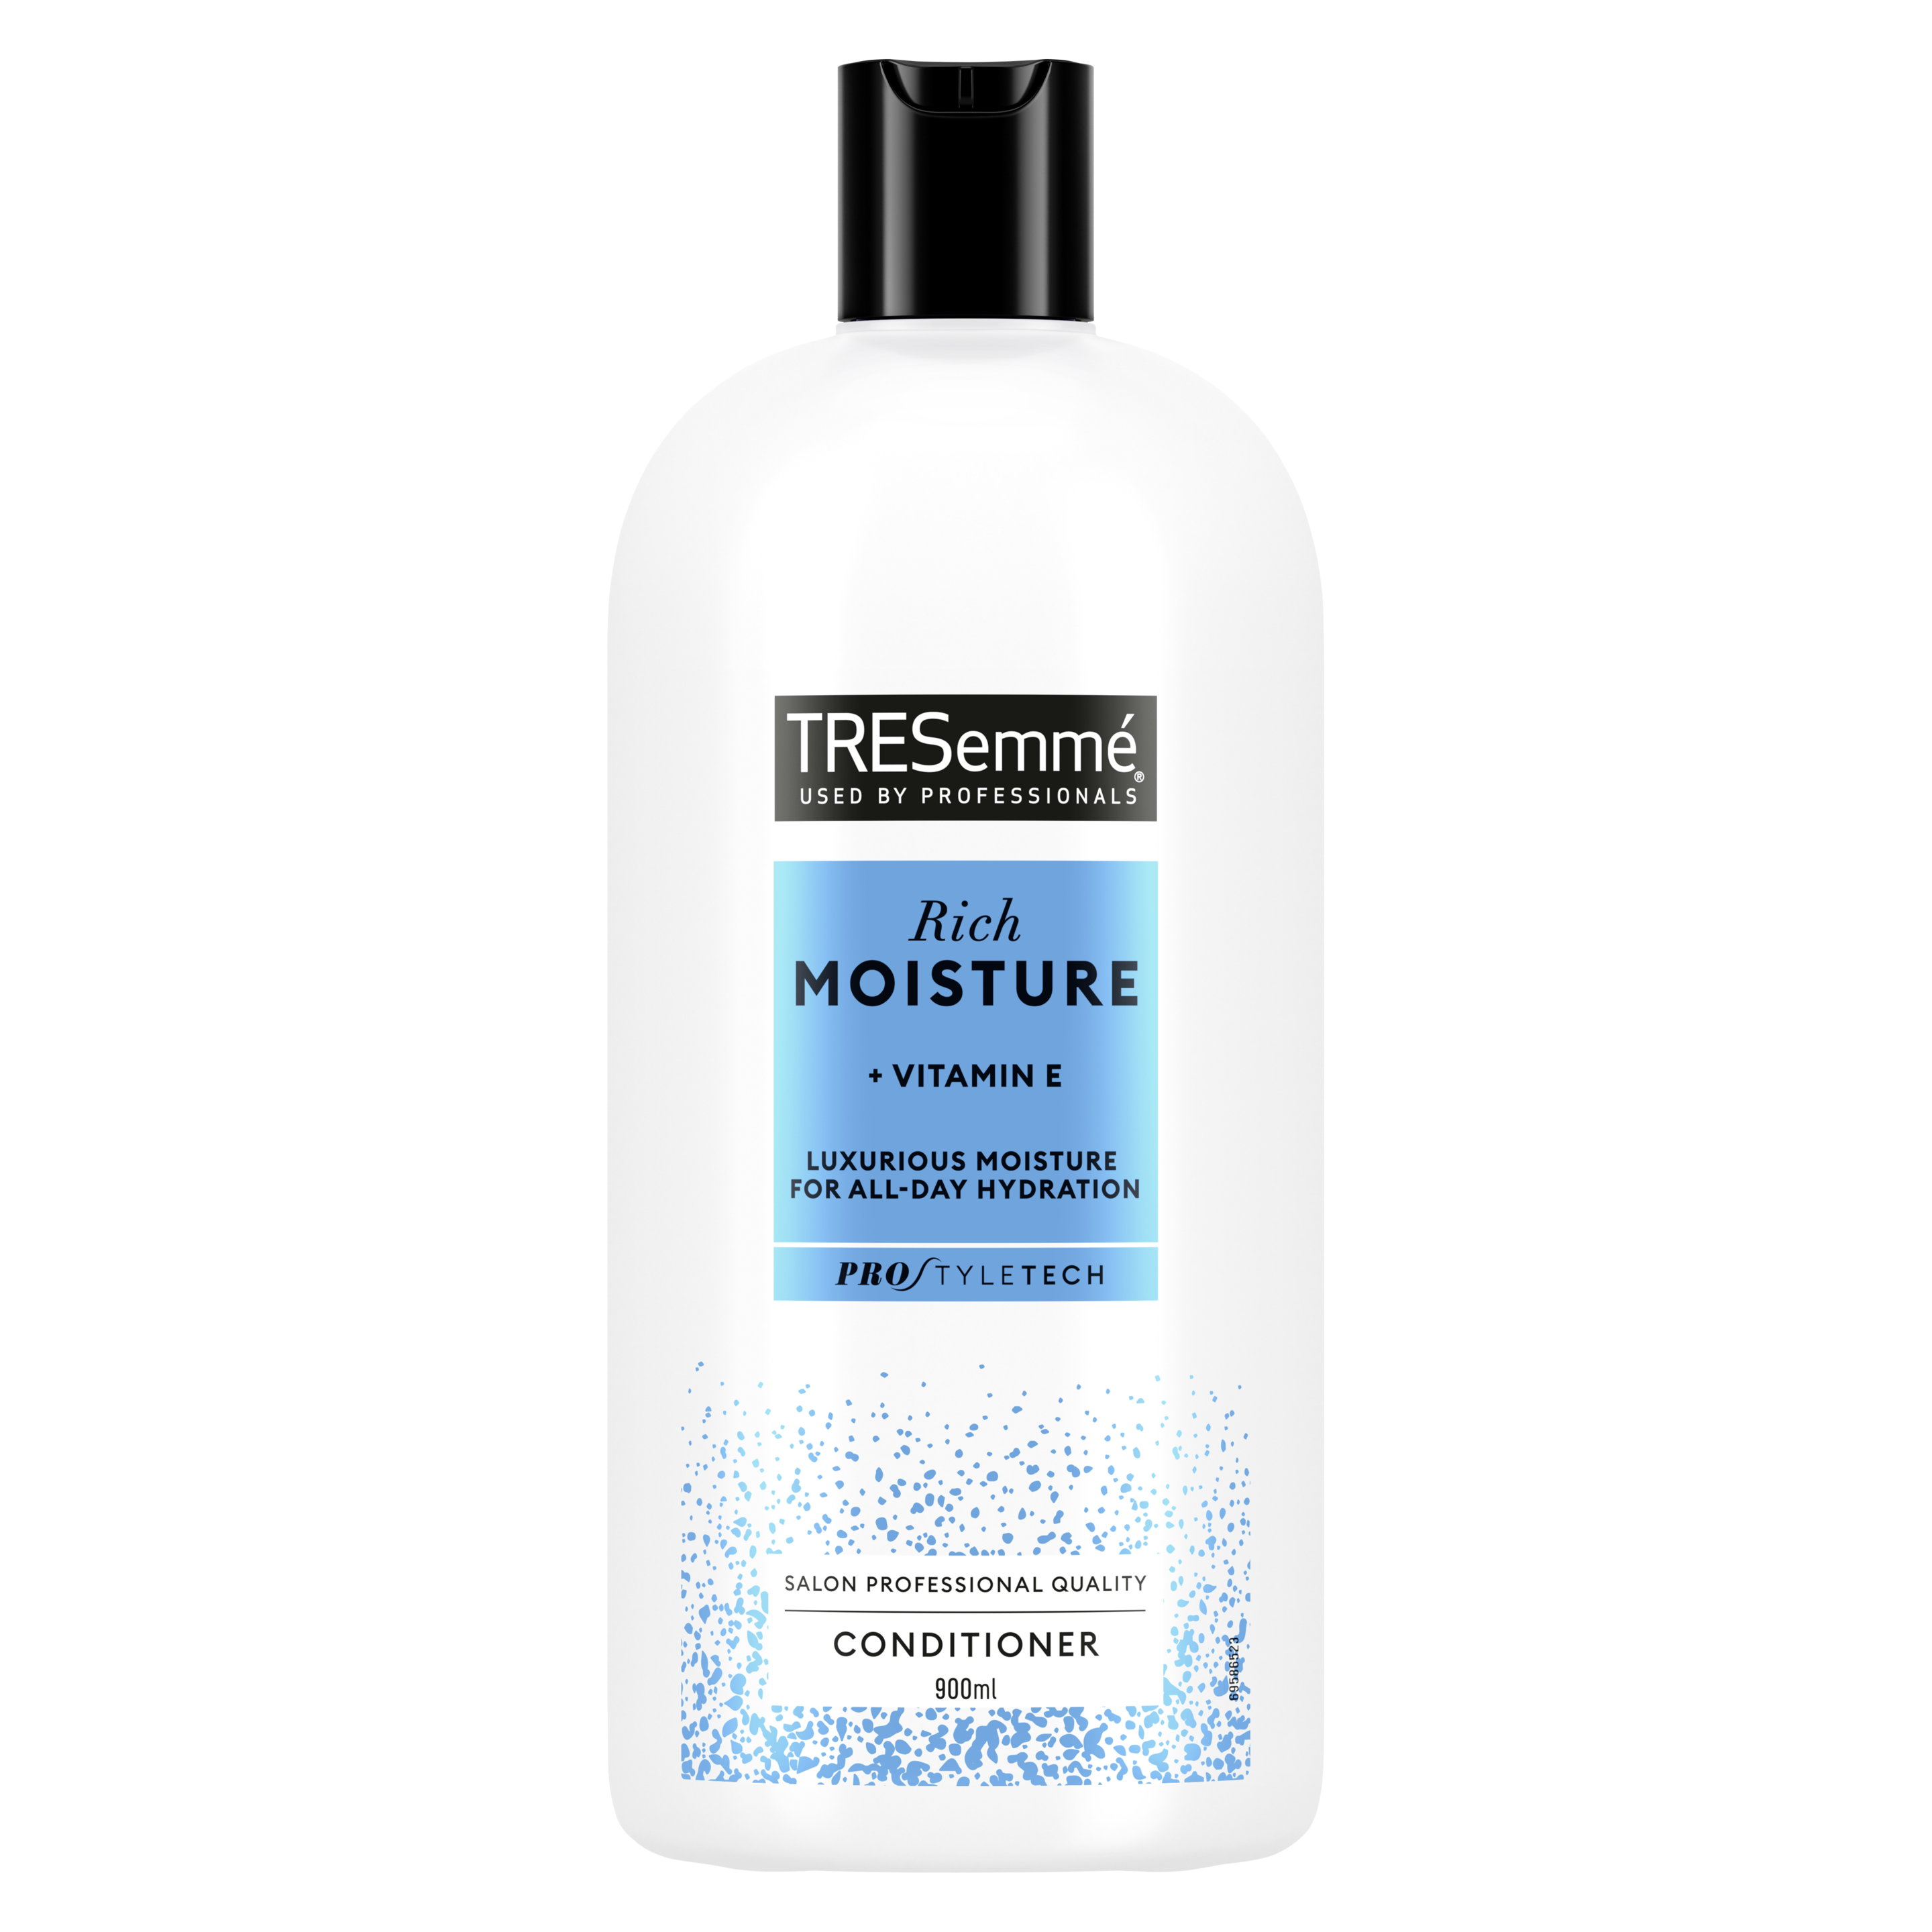 A 900ml bottle of TRESemmé Moisture Rich Conditioner front of pack image